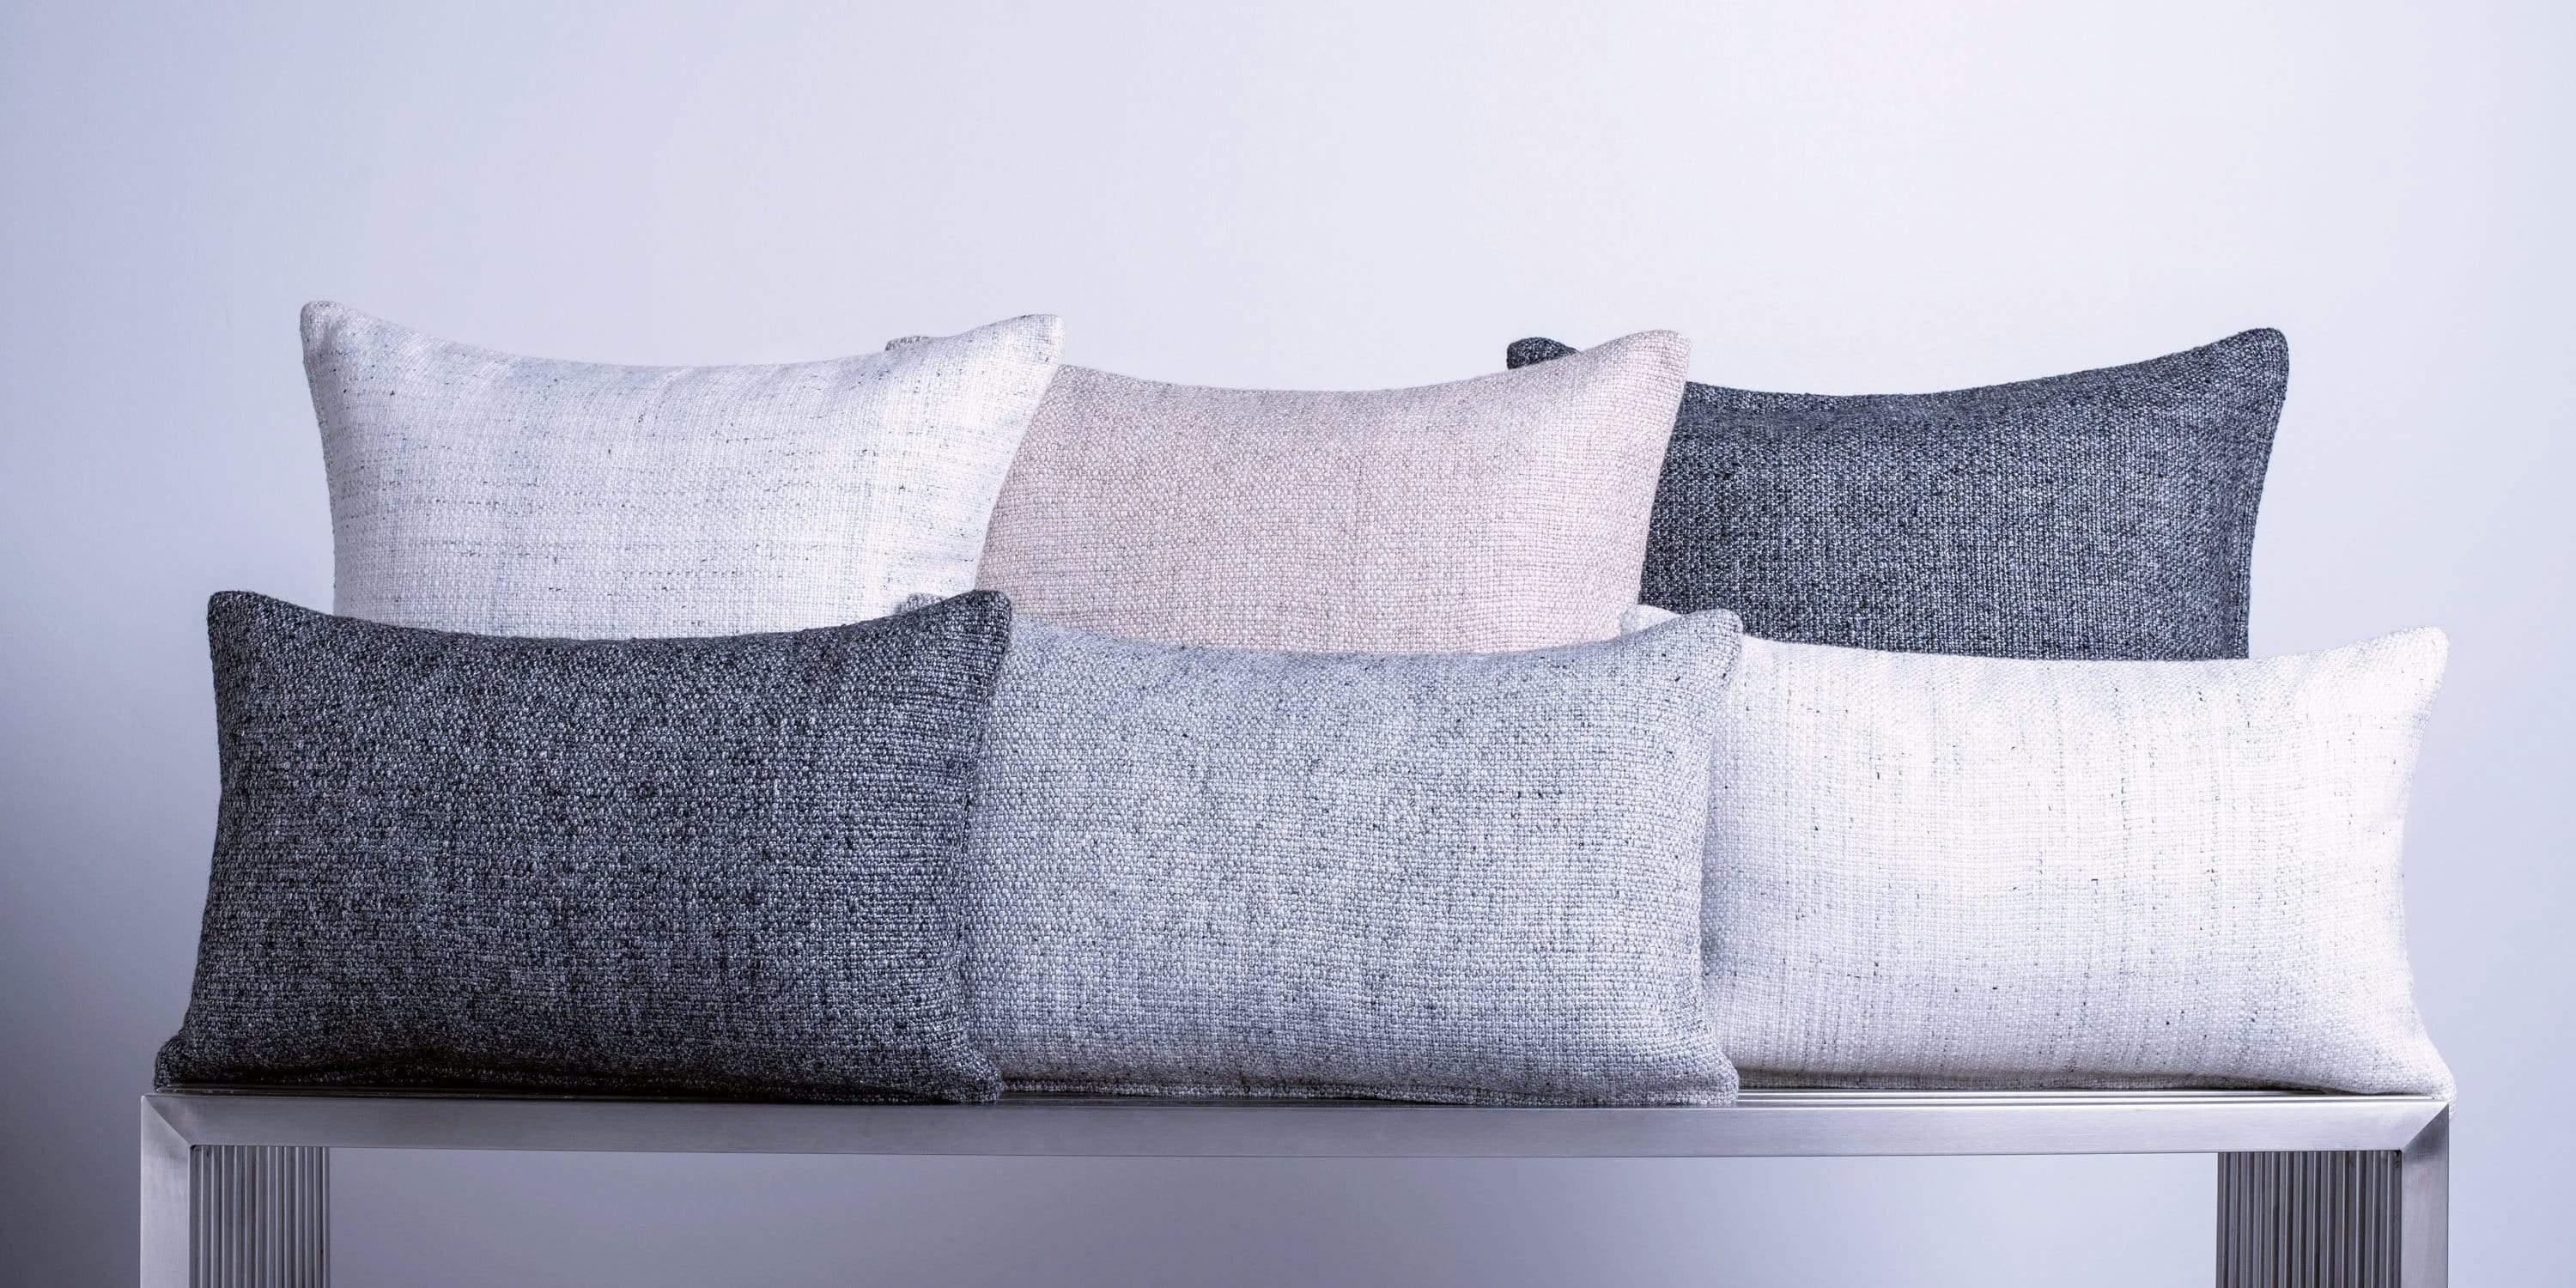 Adding texture to your space brings your design to life. Our basketweave pillows are rich with texture, their nubby variegated tones in our signature neutral palette make them the perfect accent to your space. Pillow insert sold separately.

Size